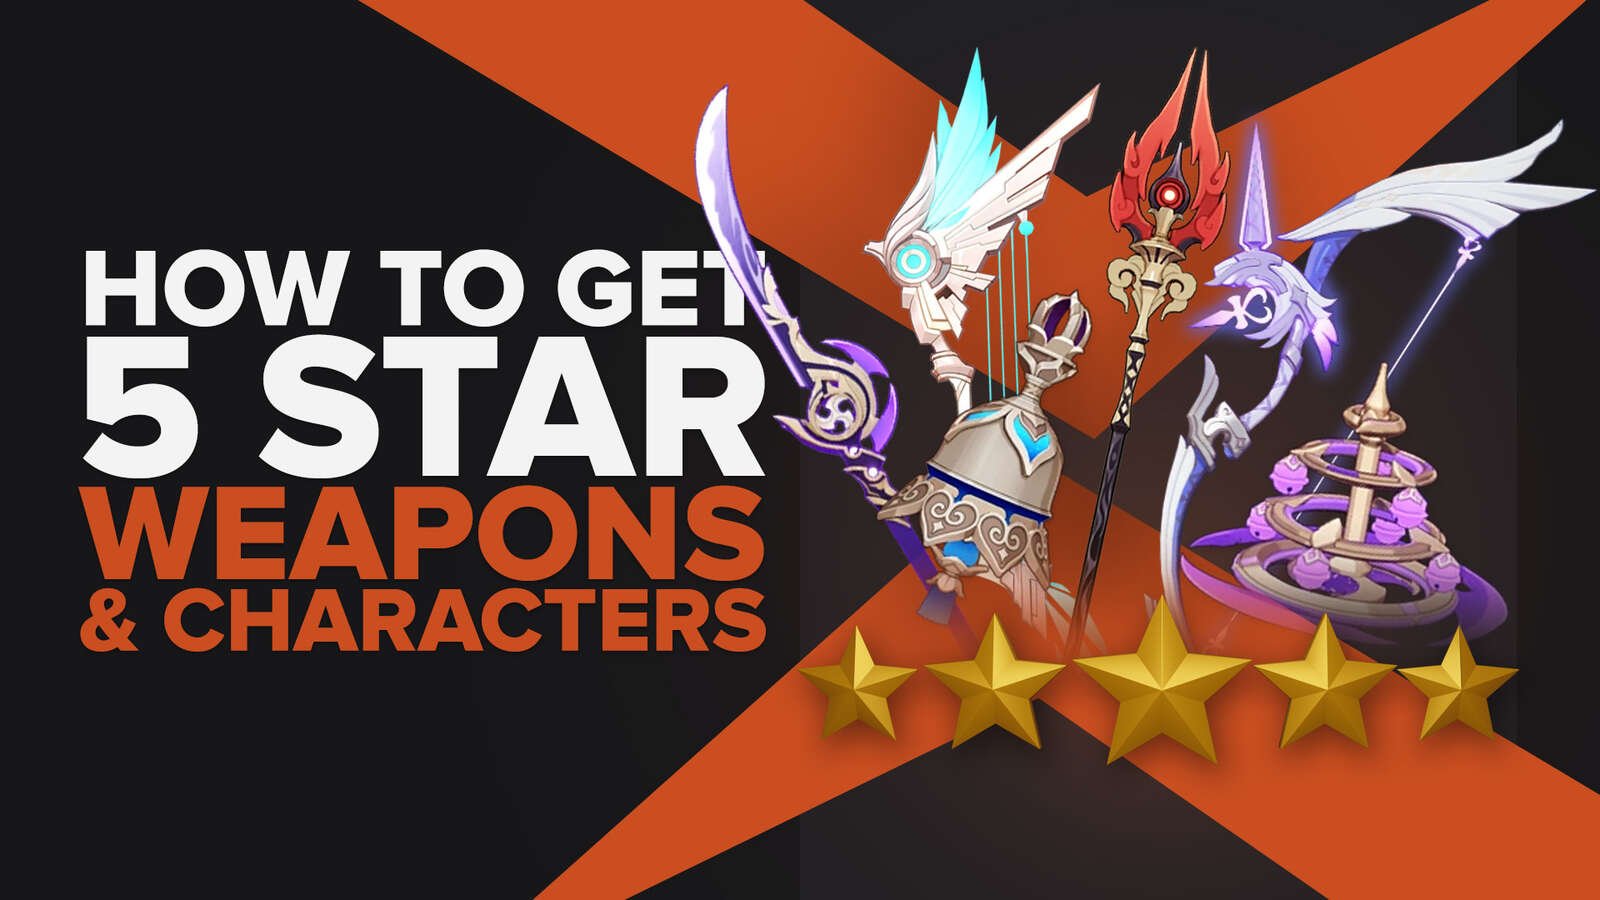 How To Get Five-Star Character And Weapons in Genshin Impact? (A Simple Guide To Wishing)